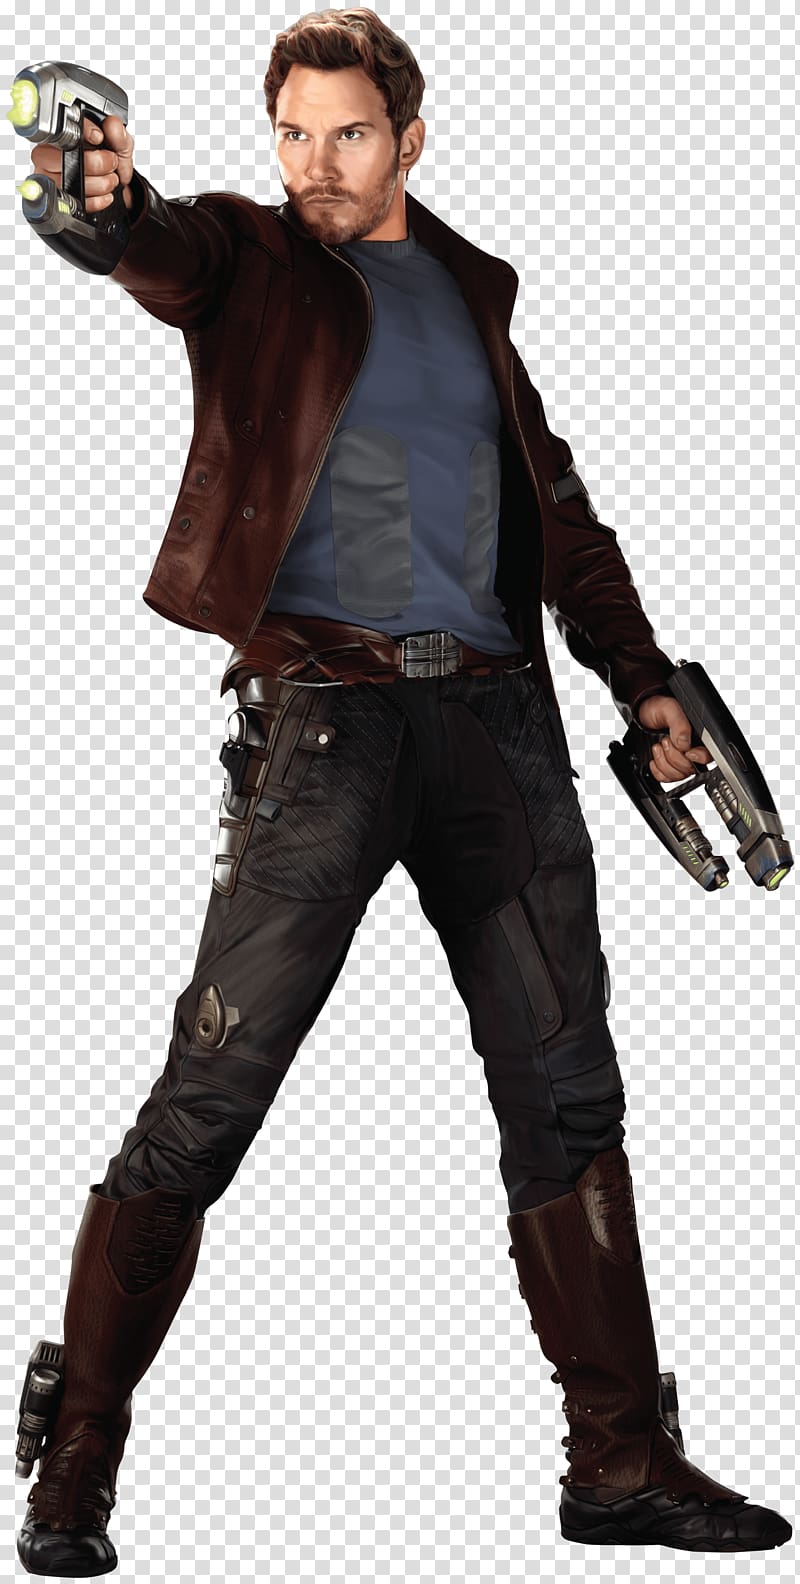 Marvel Star Lord painting, Chris Pratt Marvel: Avengers Alliance Star-Lord Guardians of the Galaxy Black Panther, Chris Pine transparent background PNG clipart